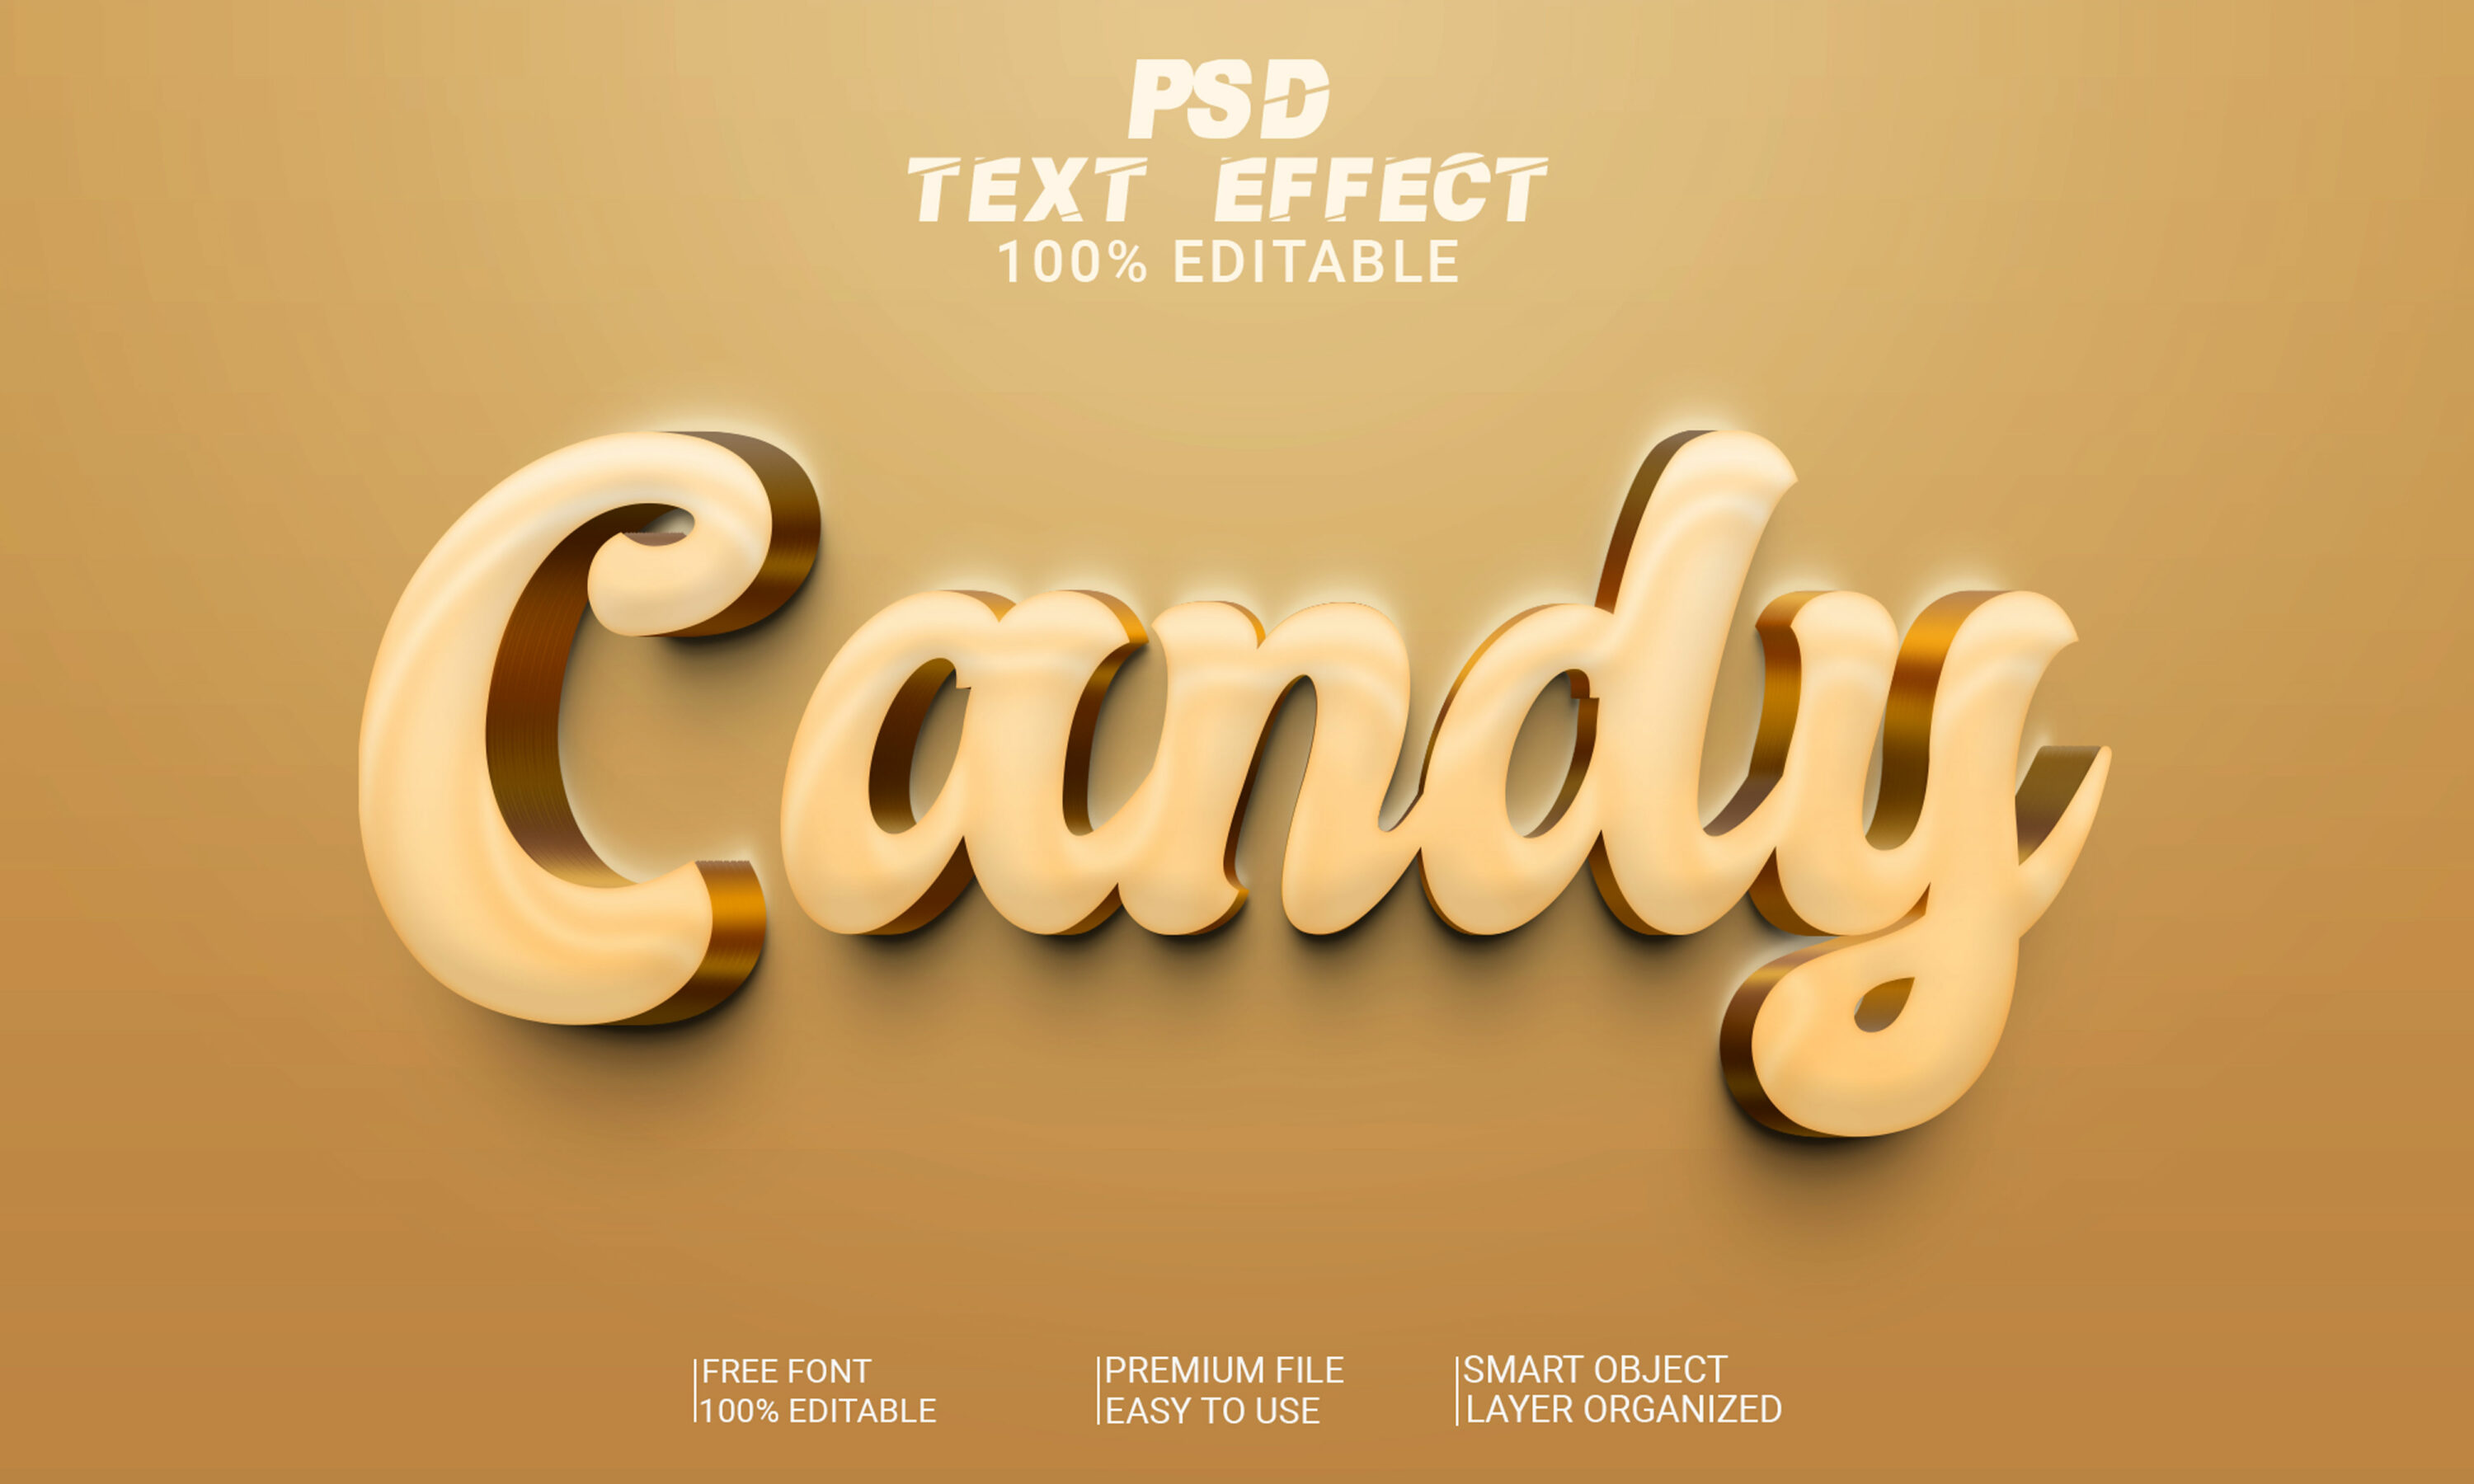 Text Style PSD File milk candy text effect.